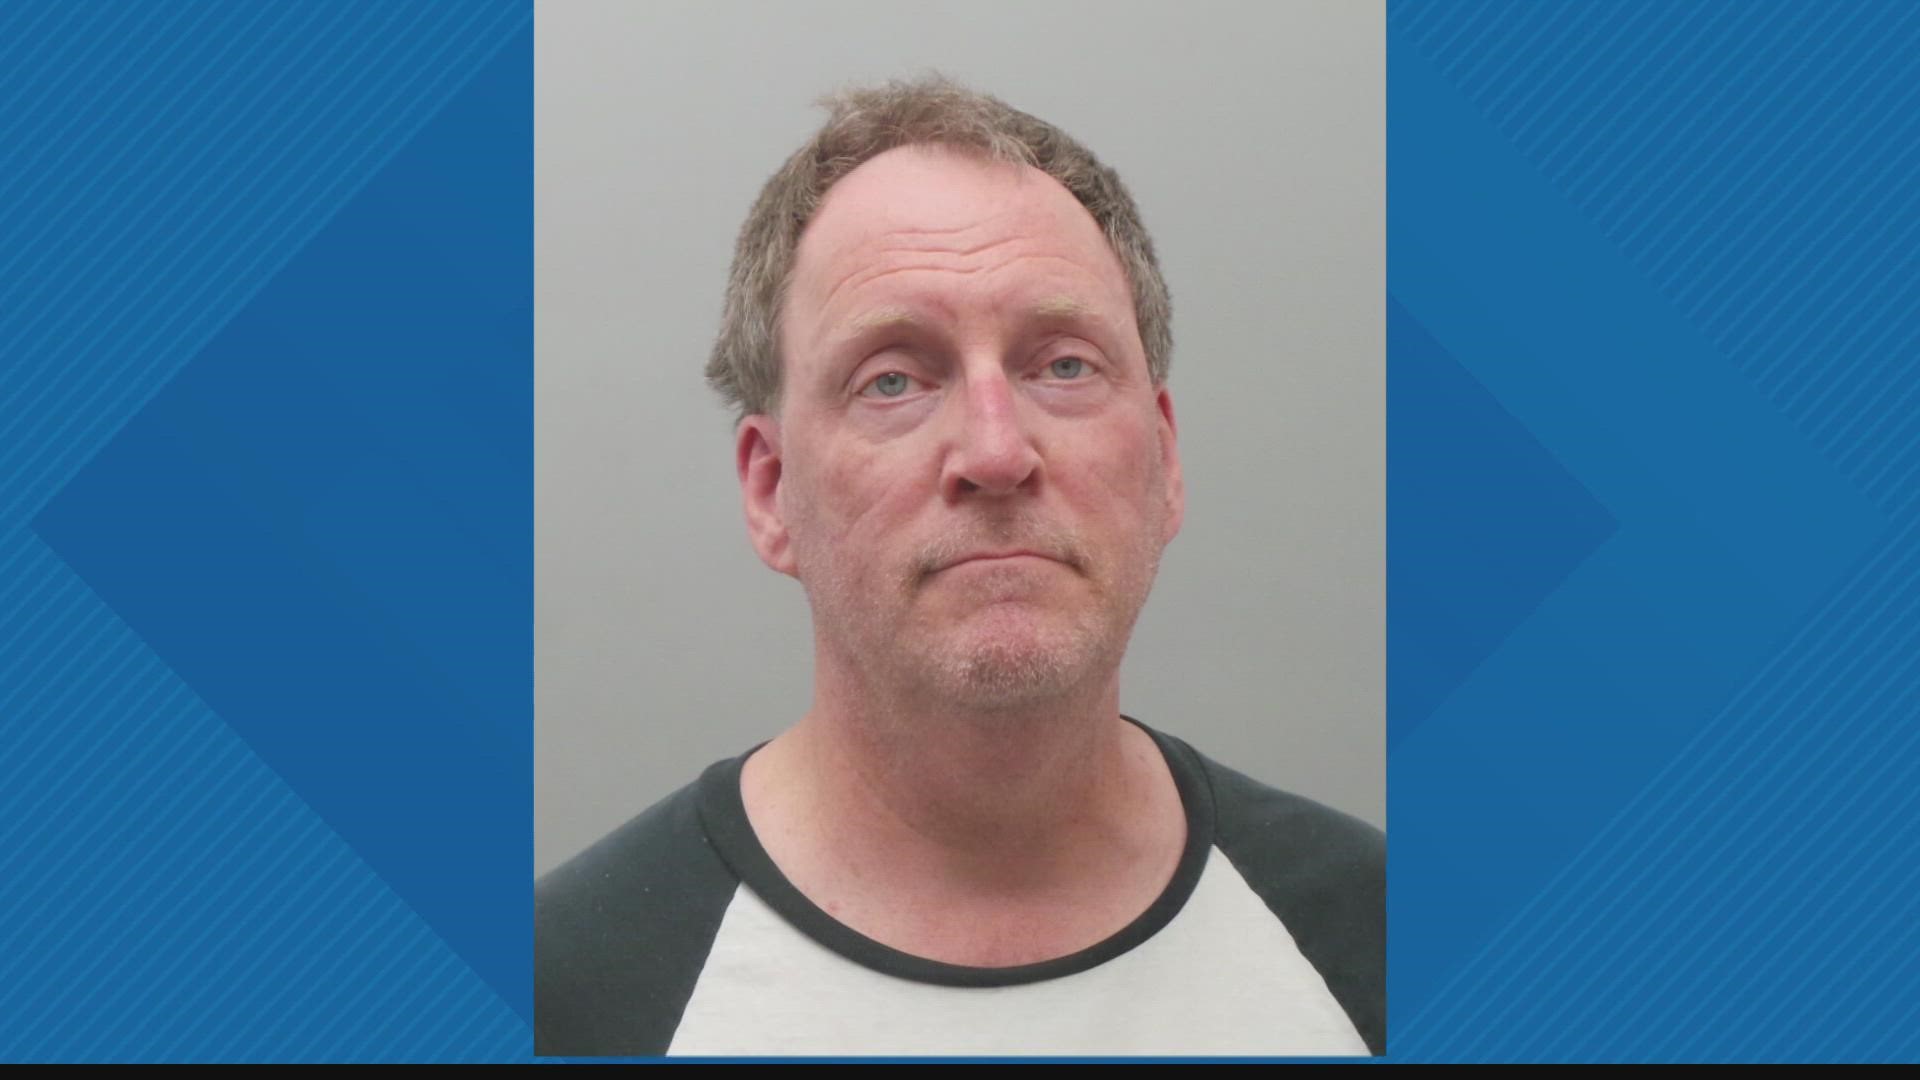 He was arrested Monday after a St. Louis County grand jury indicted him on a charge of sexual contact with a student in connection with an April 2022 incident.